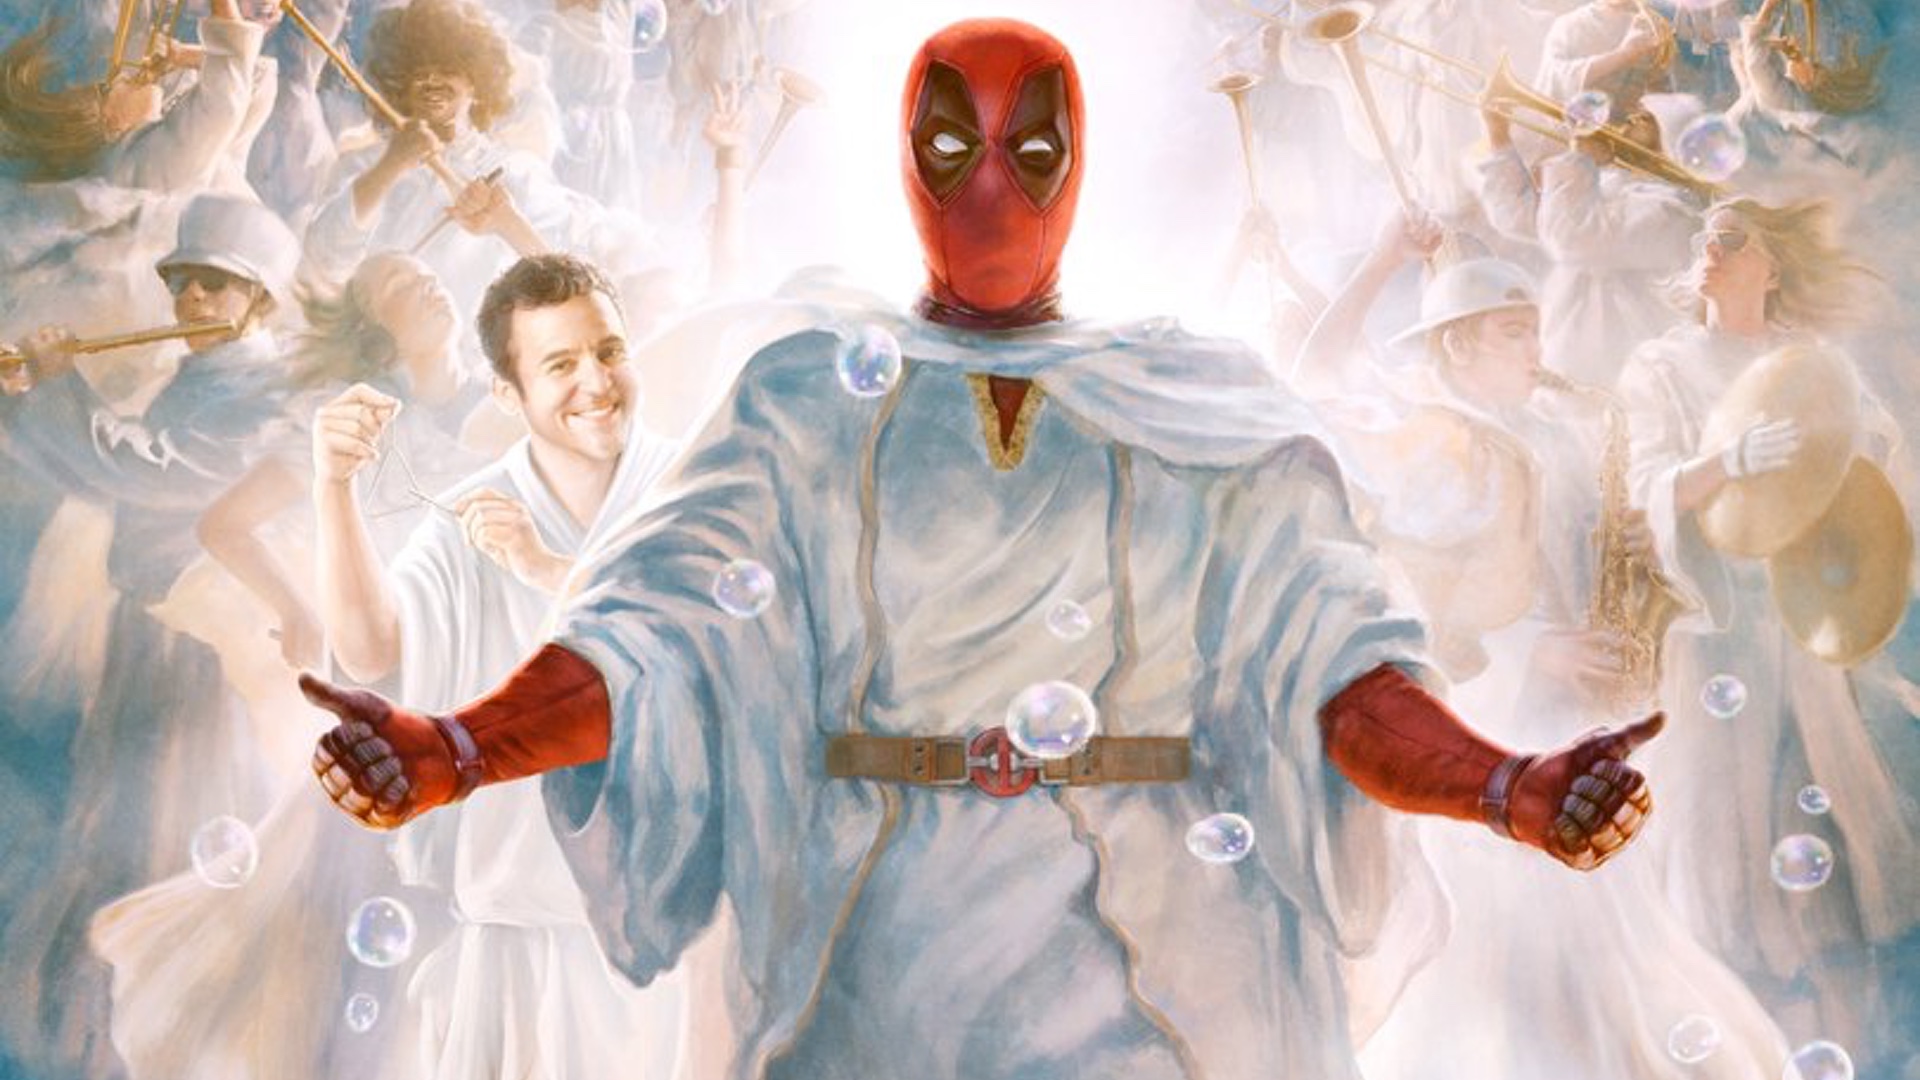 The Poster From Once Upon A Deadpool Seems To Parody